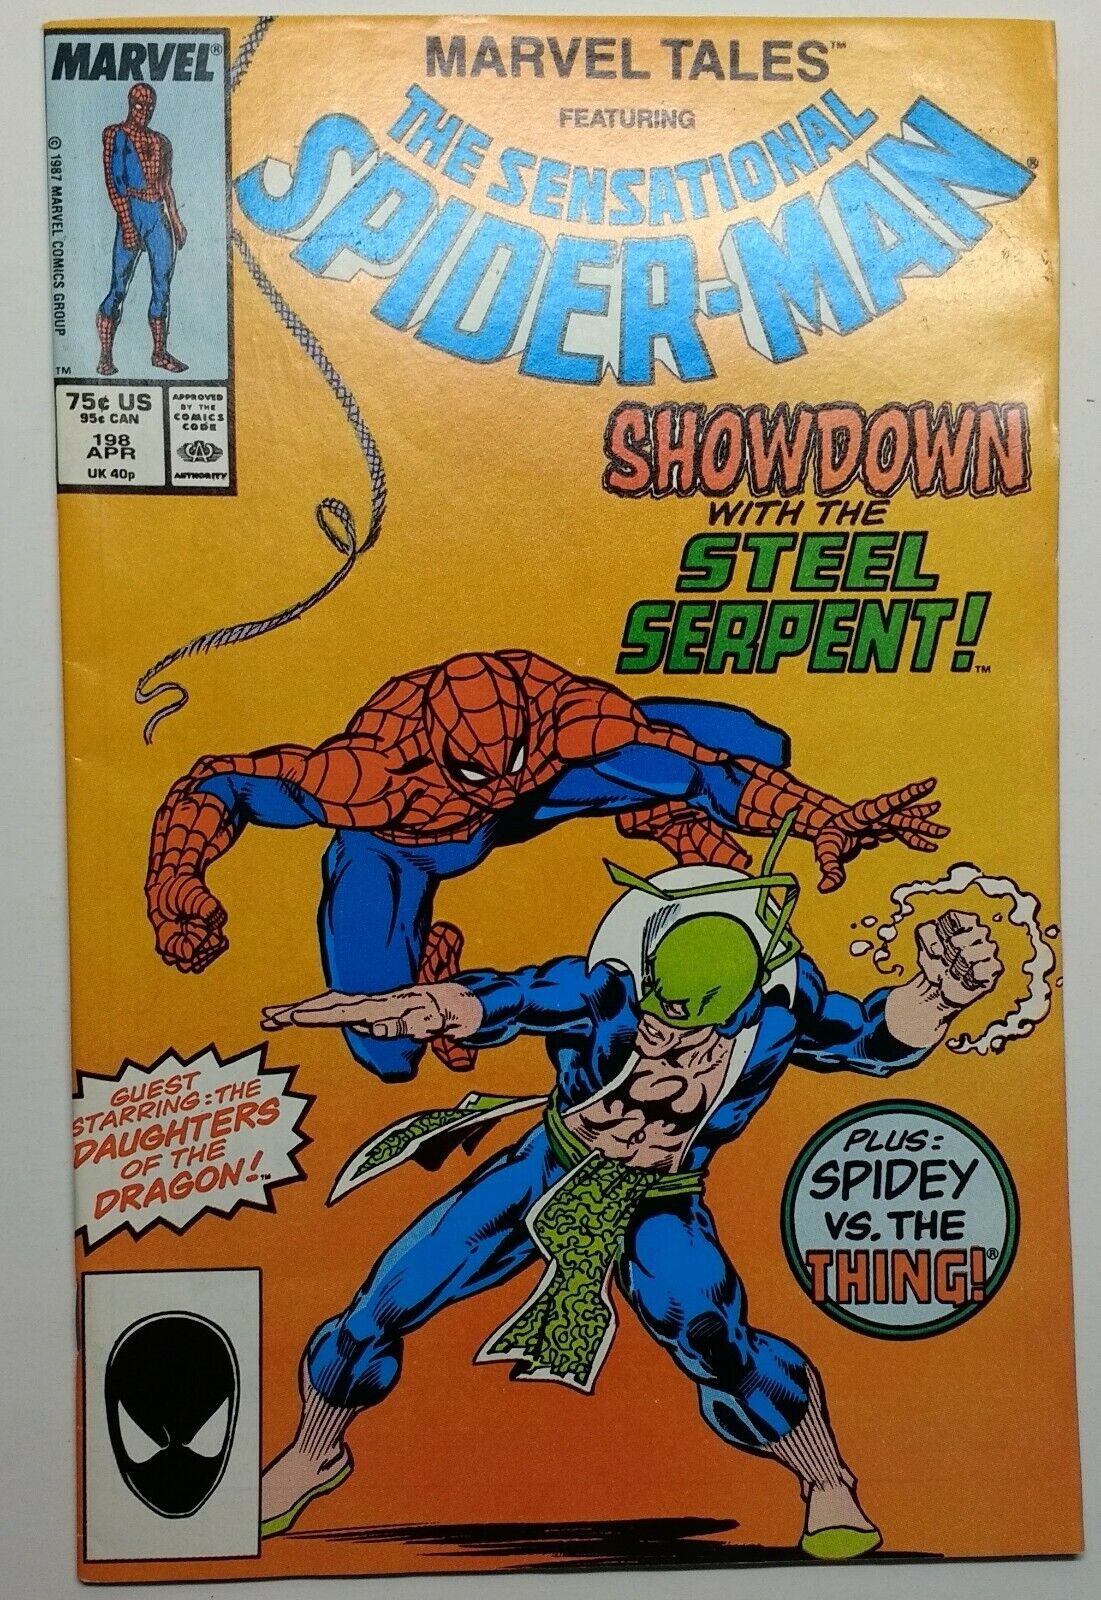 Marvel Team-Up/Two-In-One / Spider-Man, Thing U PICK w/ UNLIMITED FLAT SHIP RATE